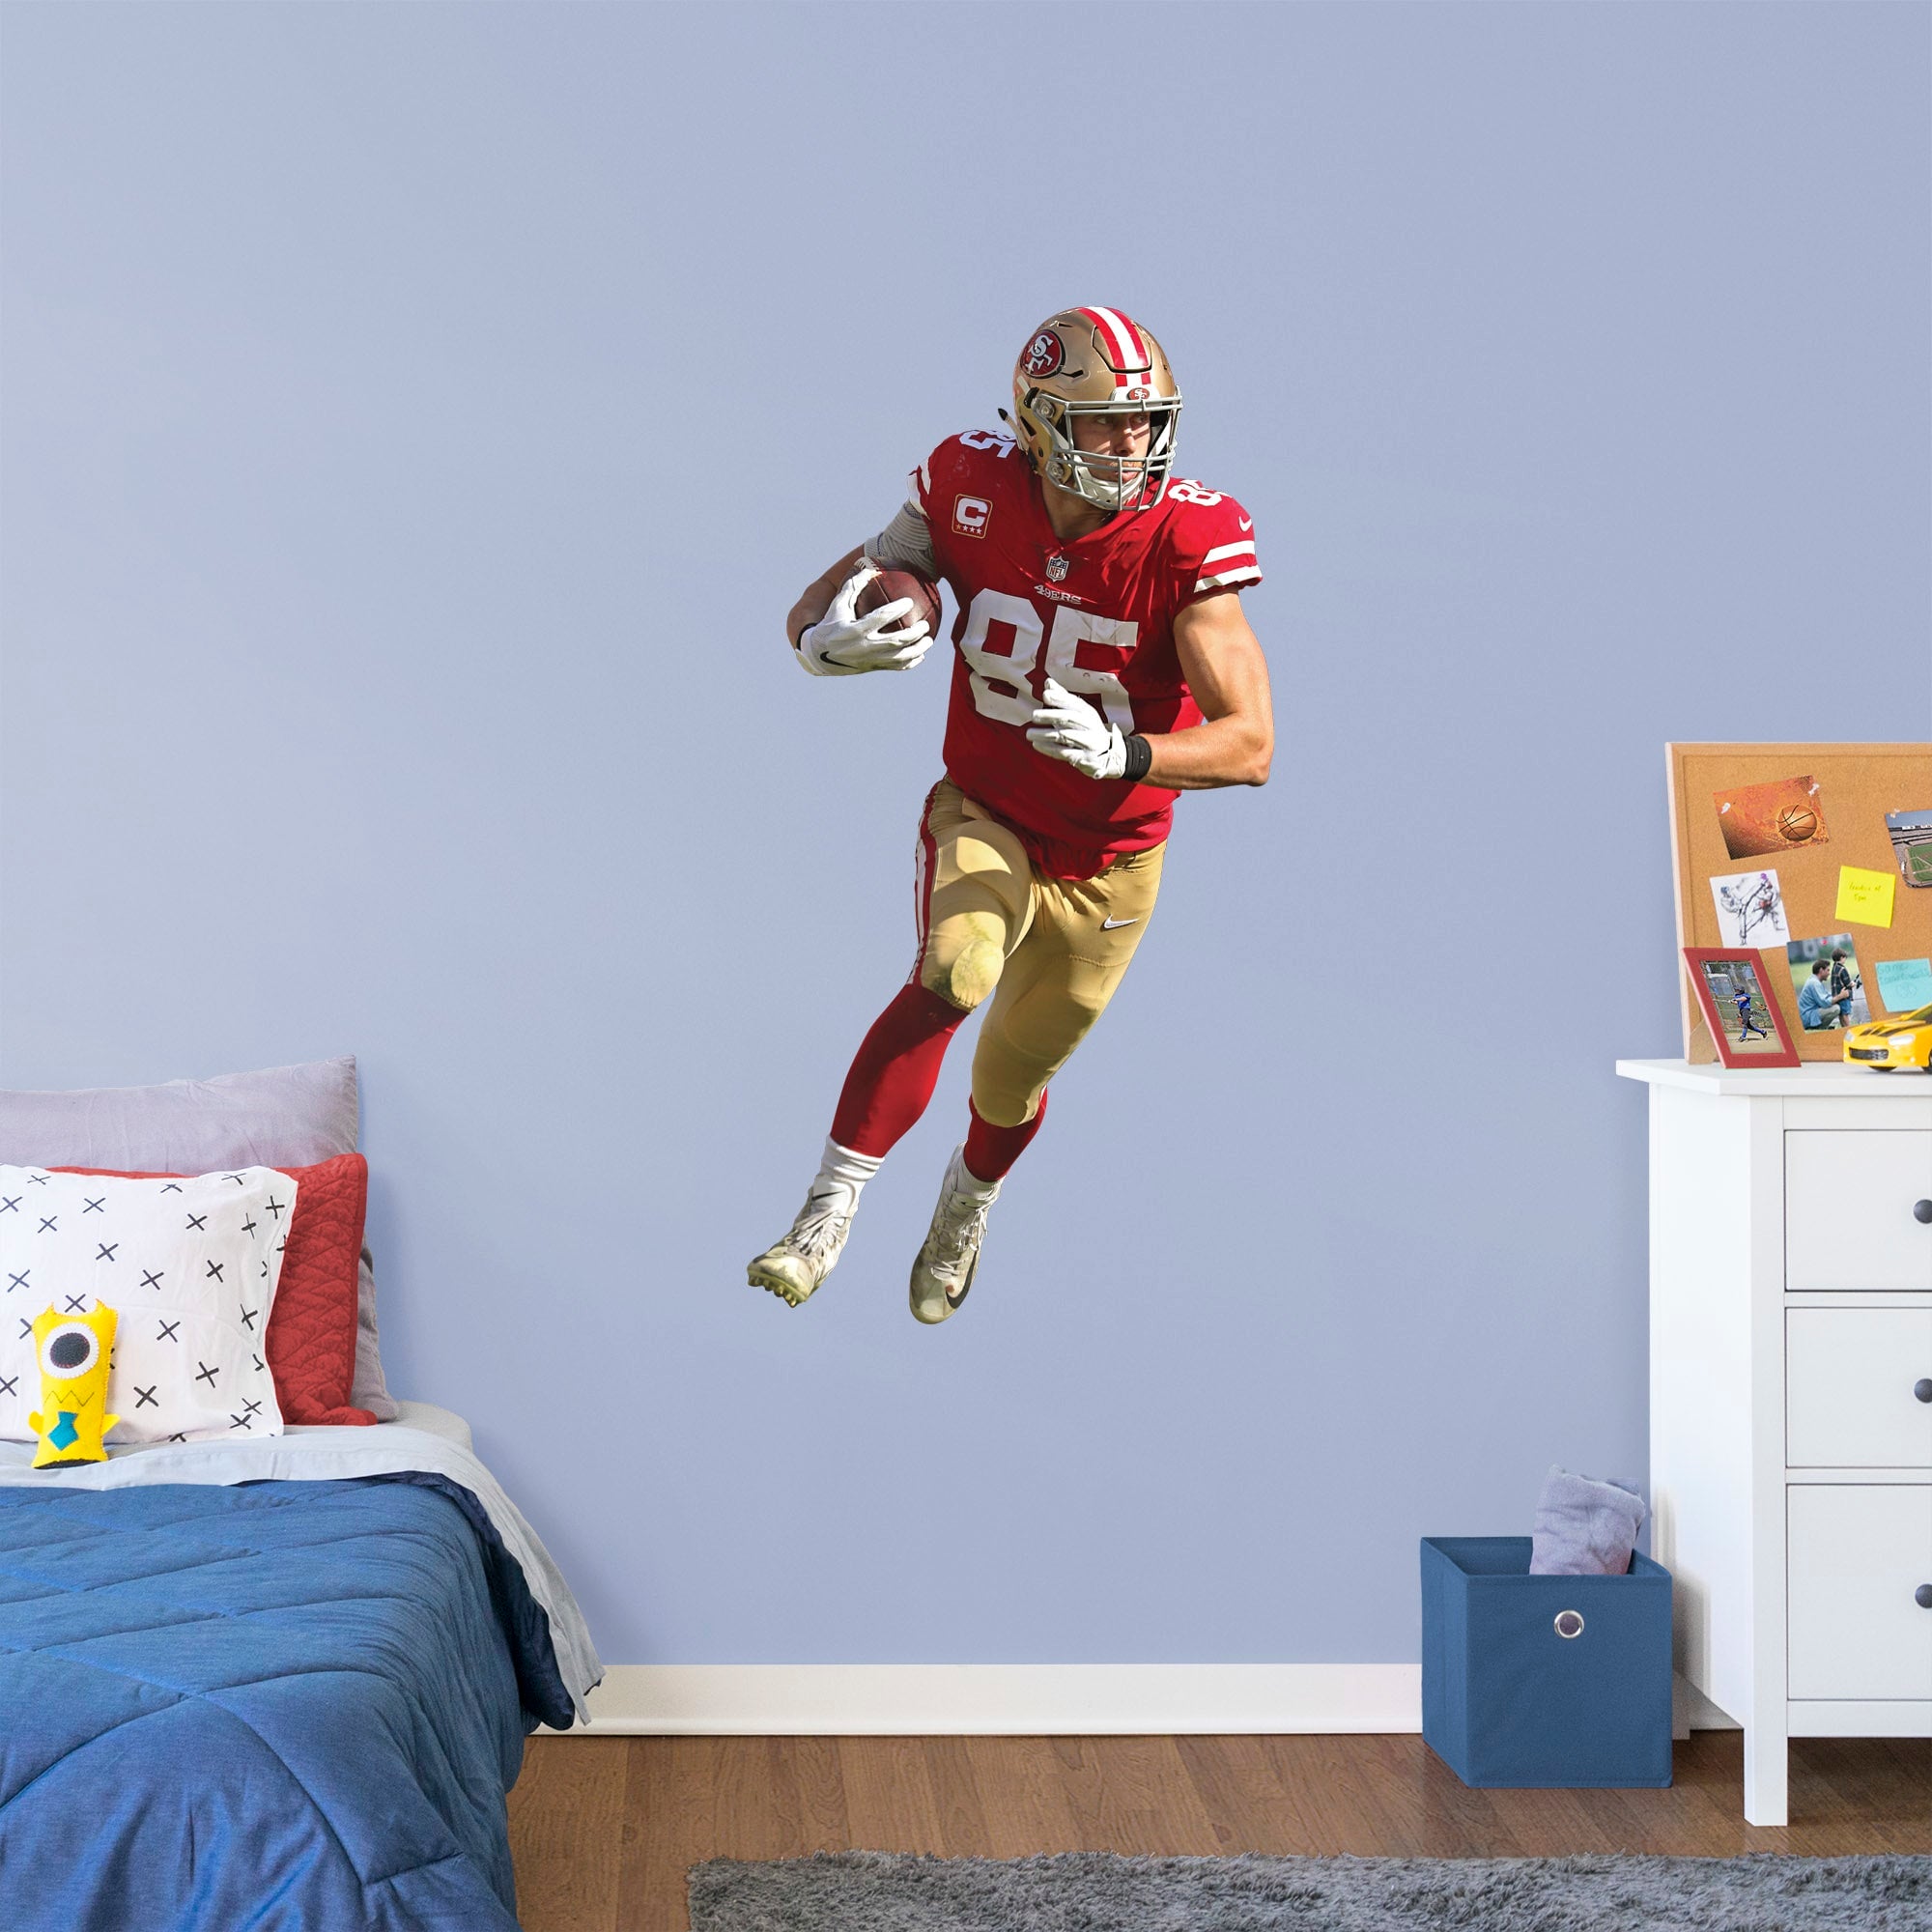 George Kittle for San Francisco 49ers - Officially Licensed NFL Removable Wall Decal Giant Athlete + 2 Decals (26"W x 51"H) by F